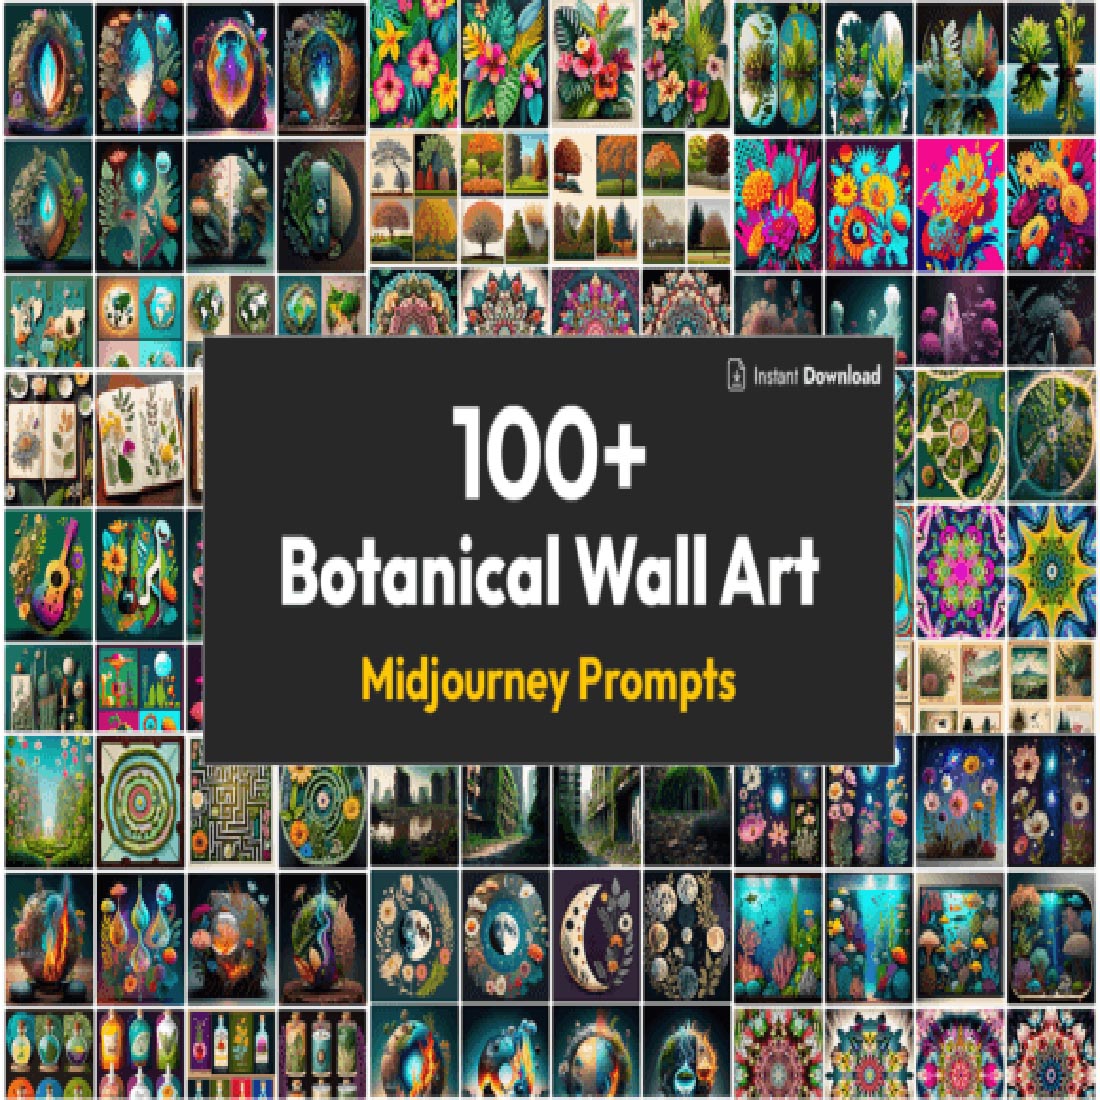 100 Botanical Wall Art Midjourne Prompts preview image.